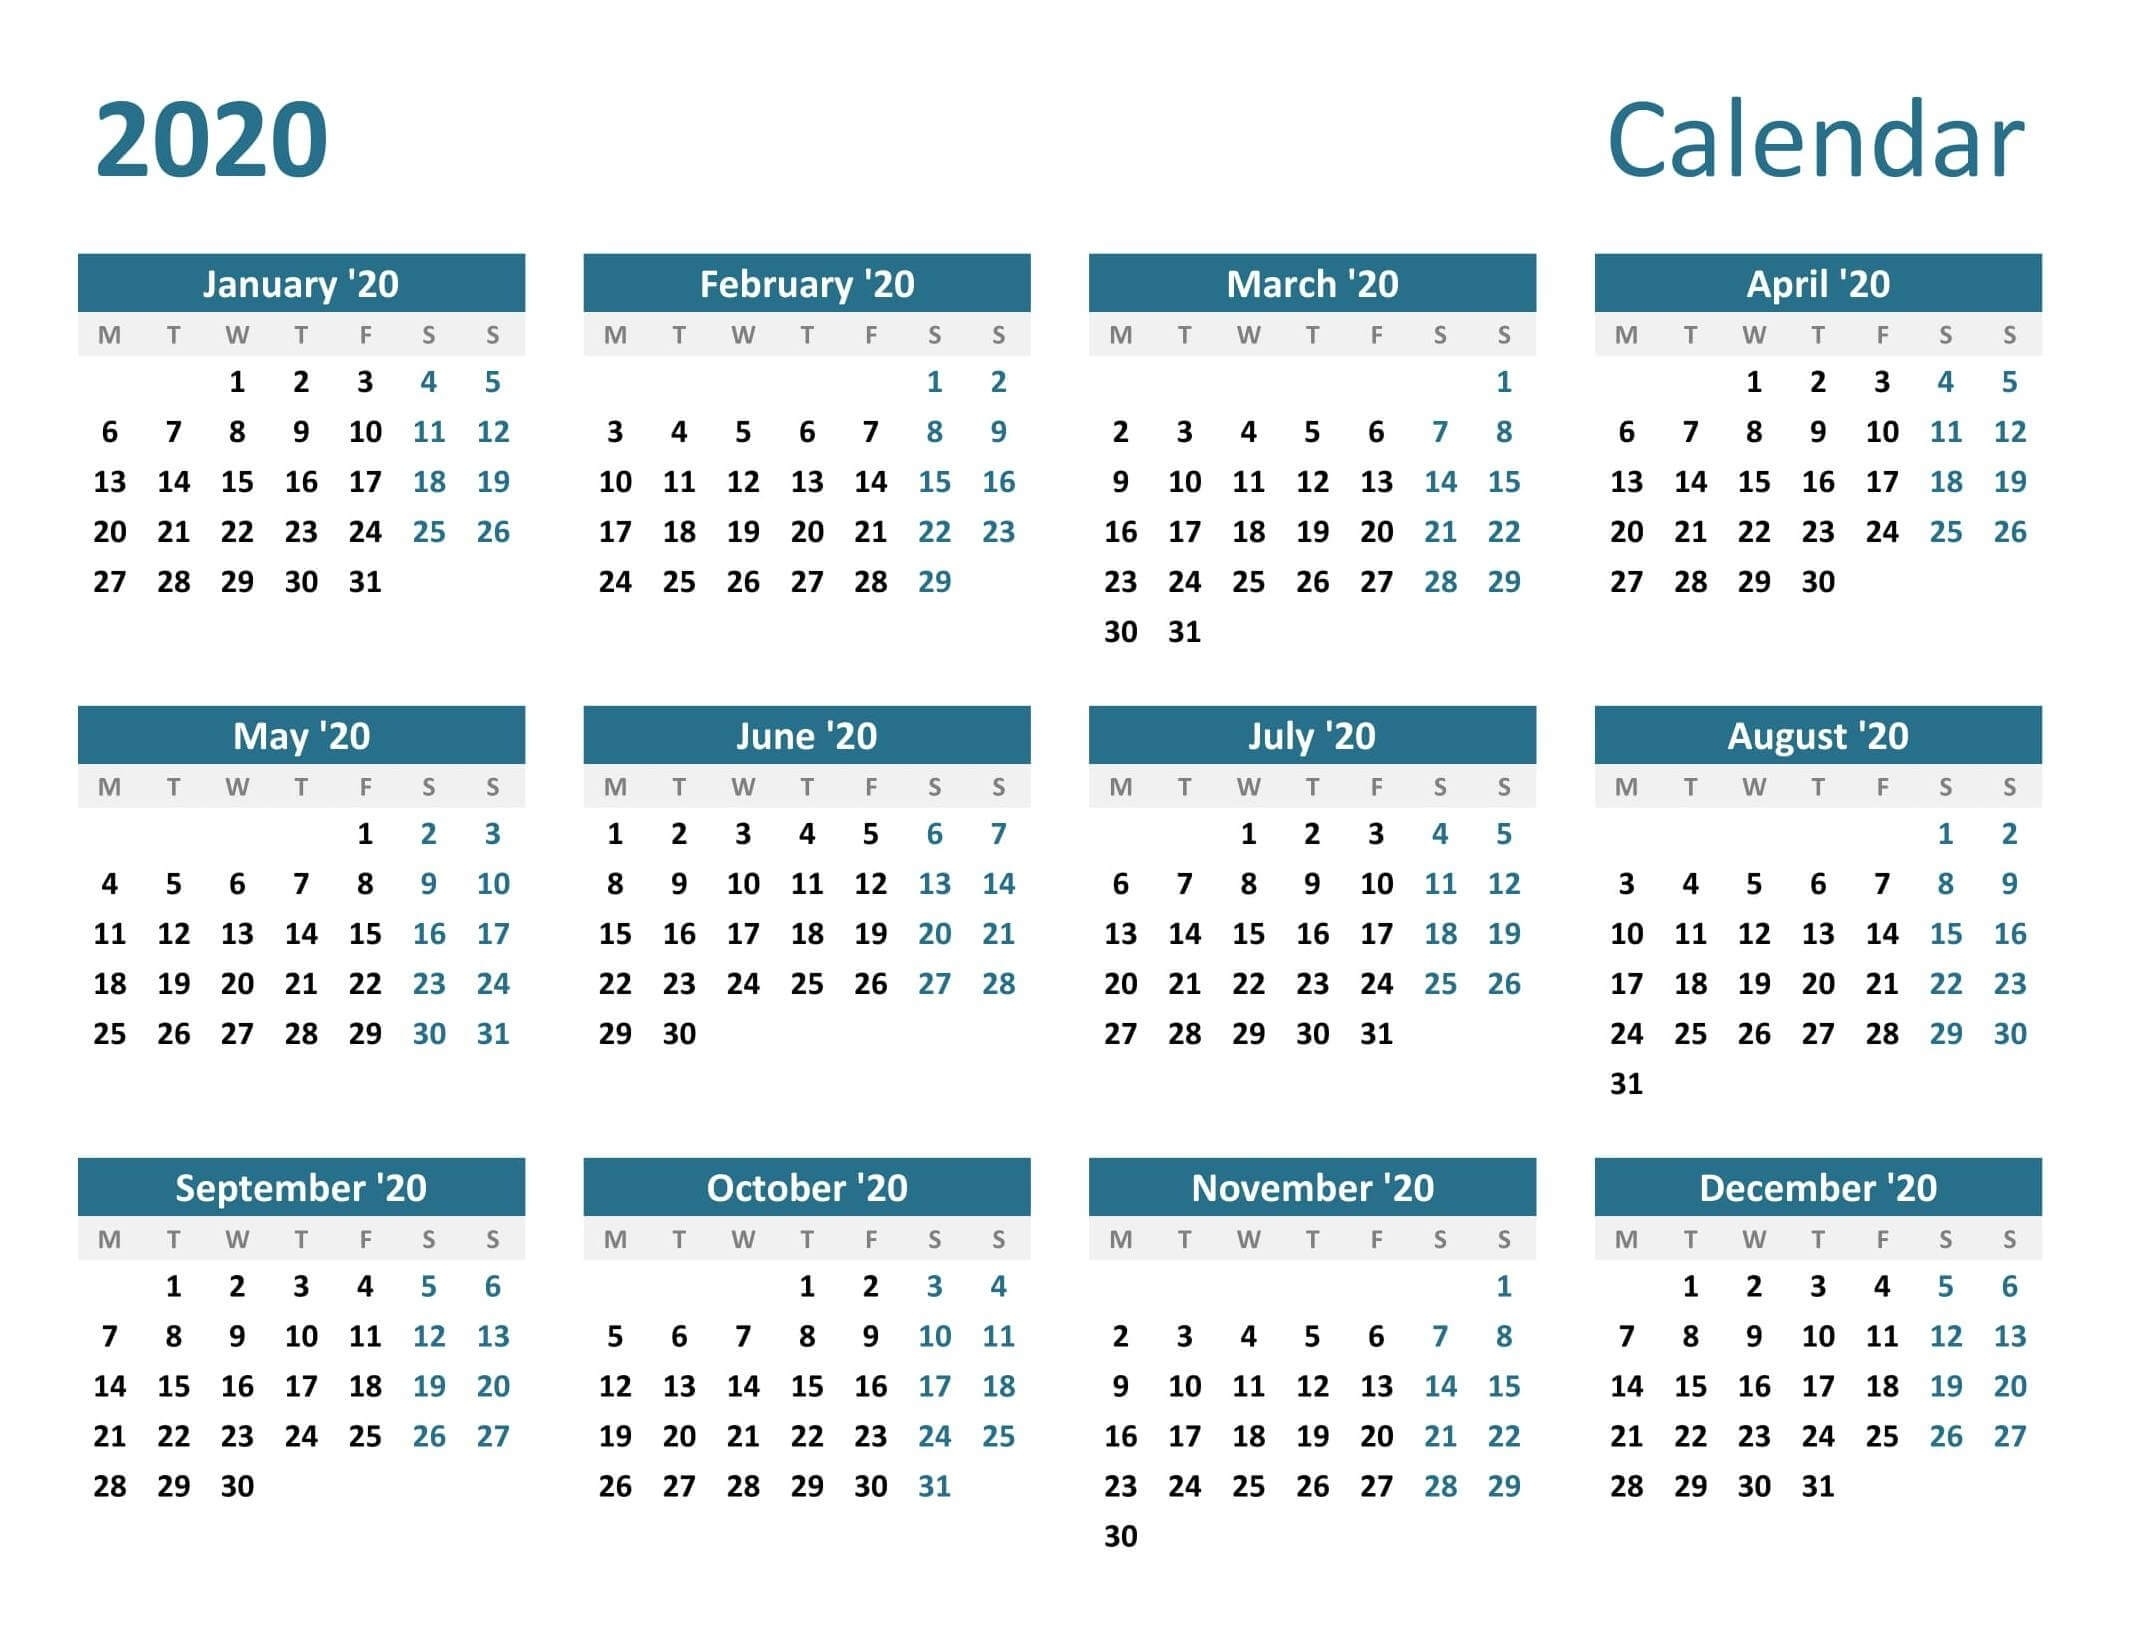 Yearly Calendar With Notes 2020 Pdf - 2019 Calendars For 2020 Calendar South Africa Pdf